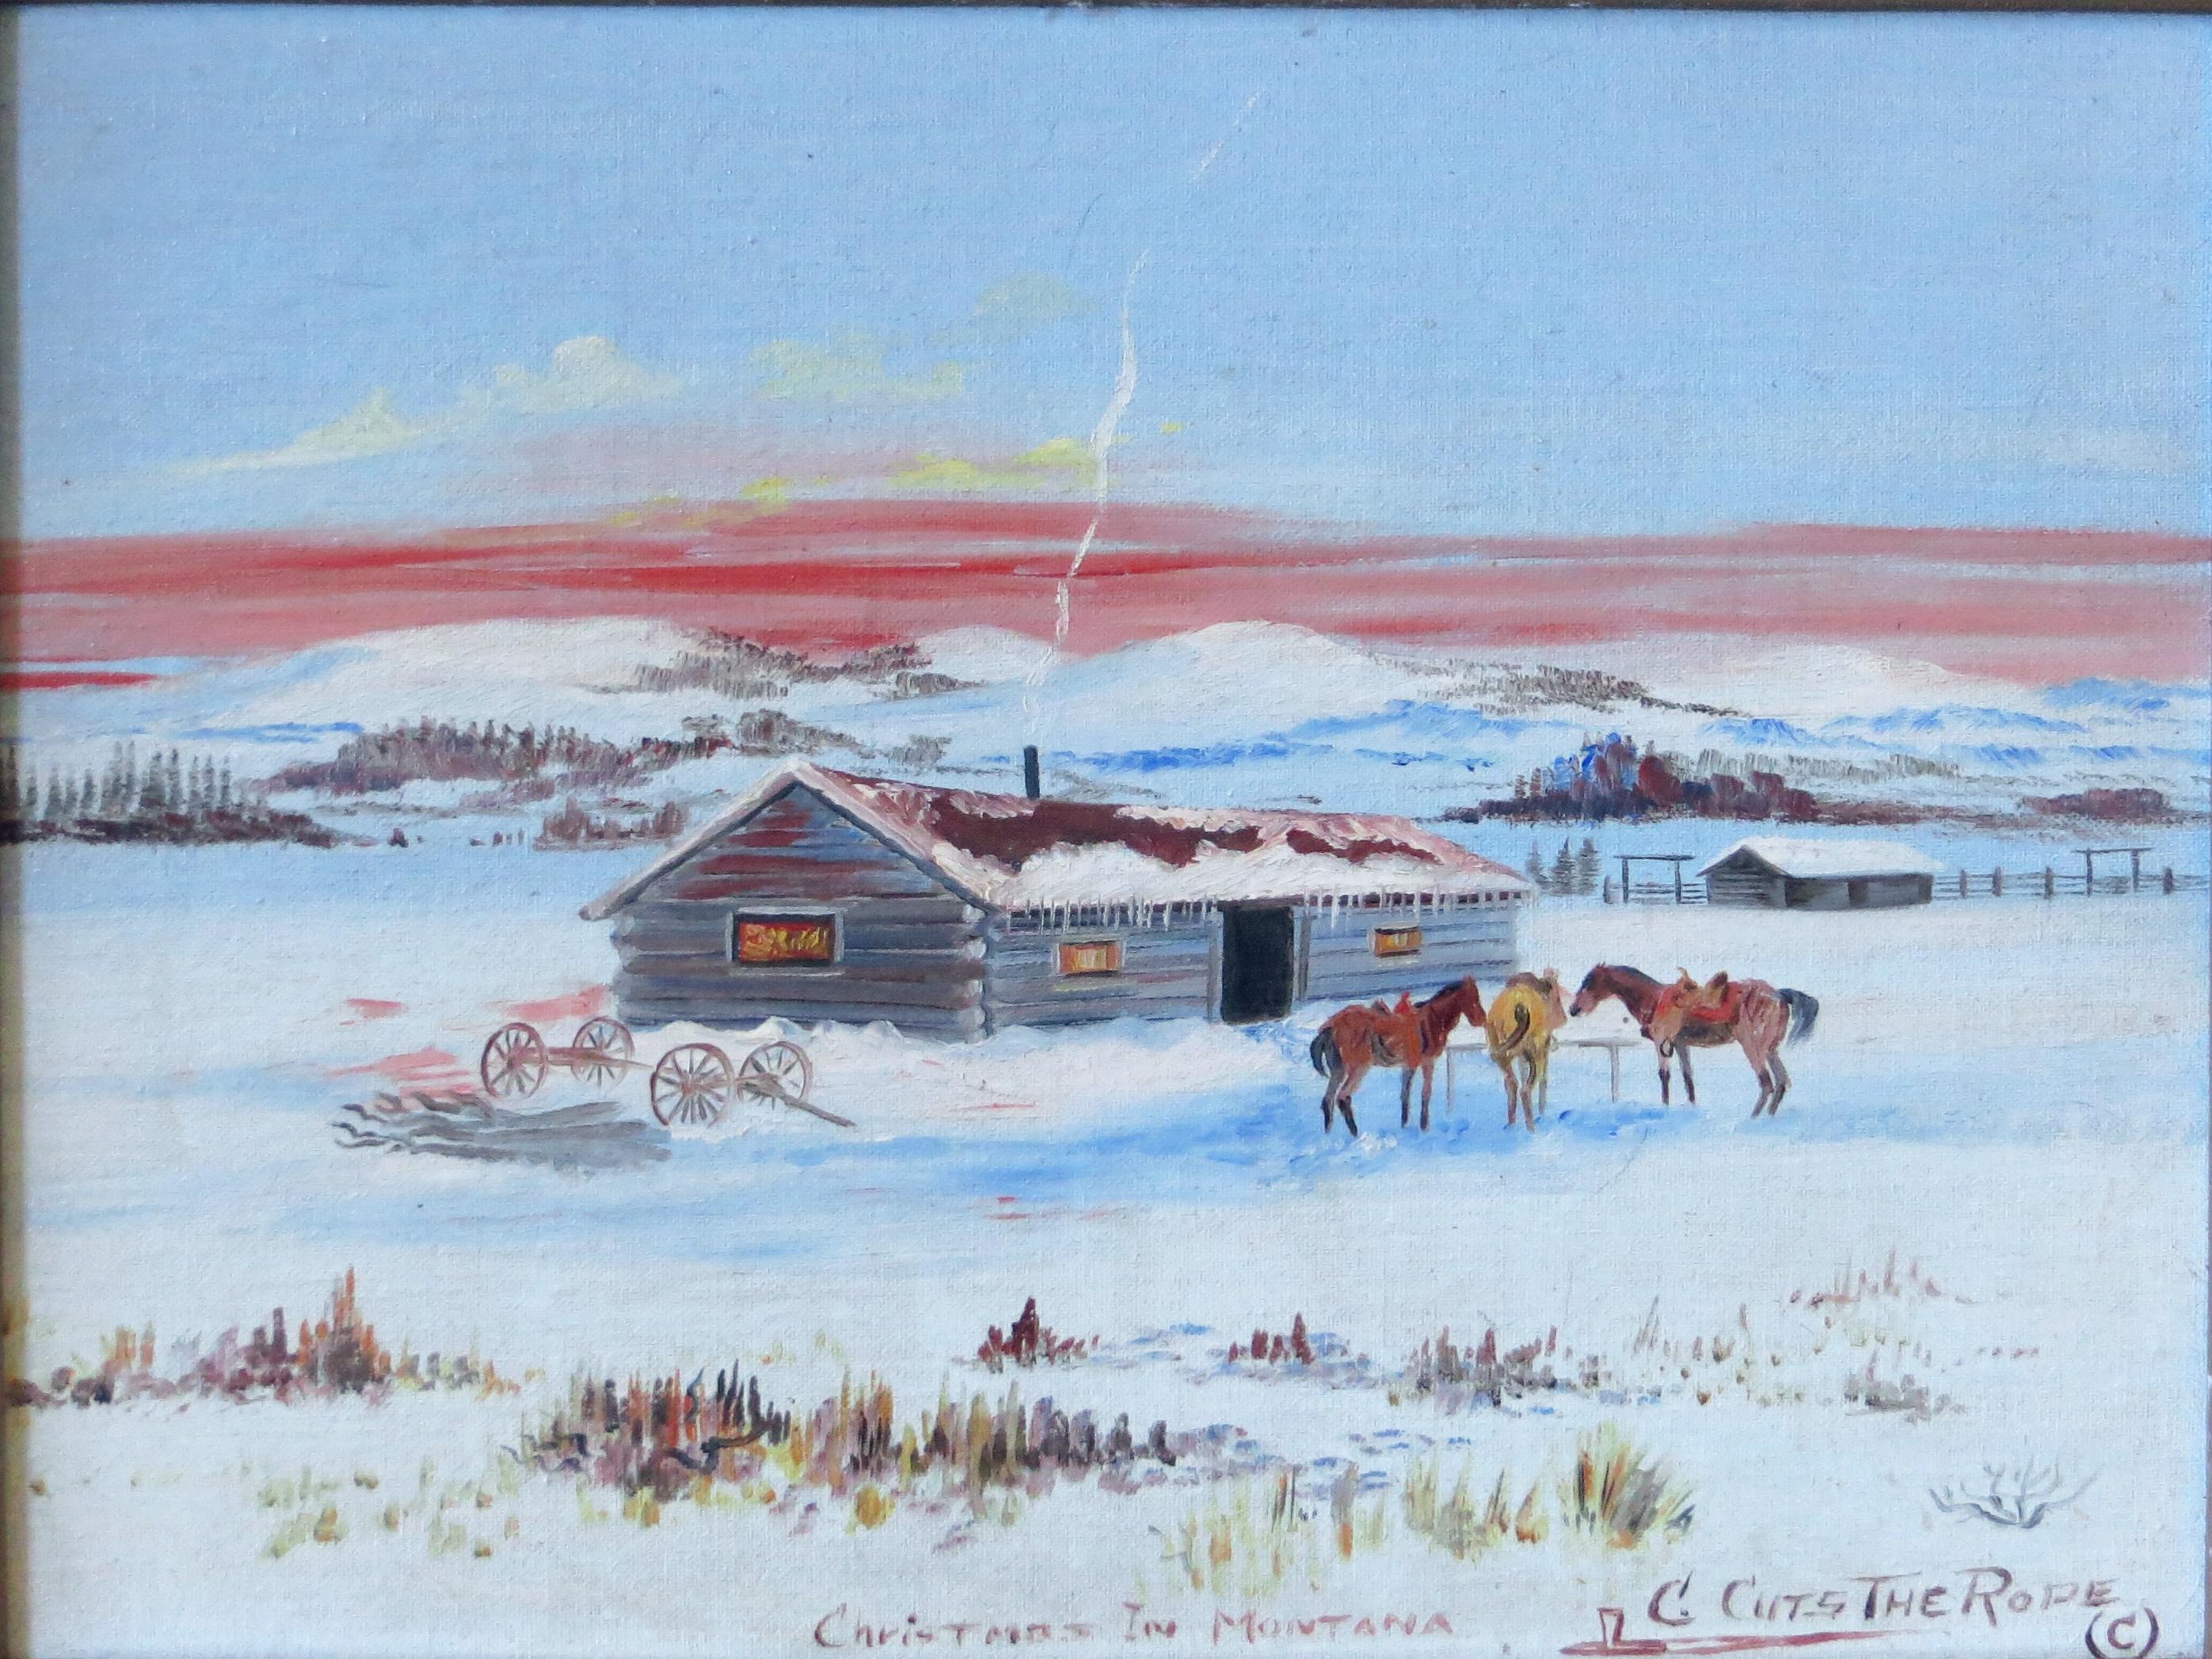 Clarence Cuts The Rope Landscape Painting - Christmas in Montana